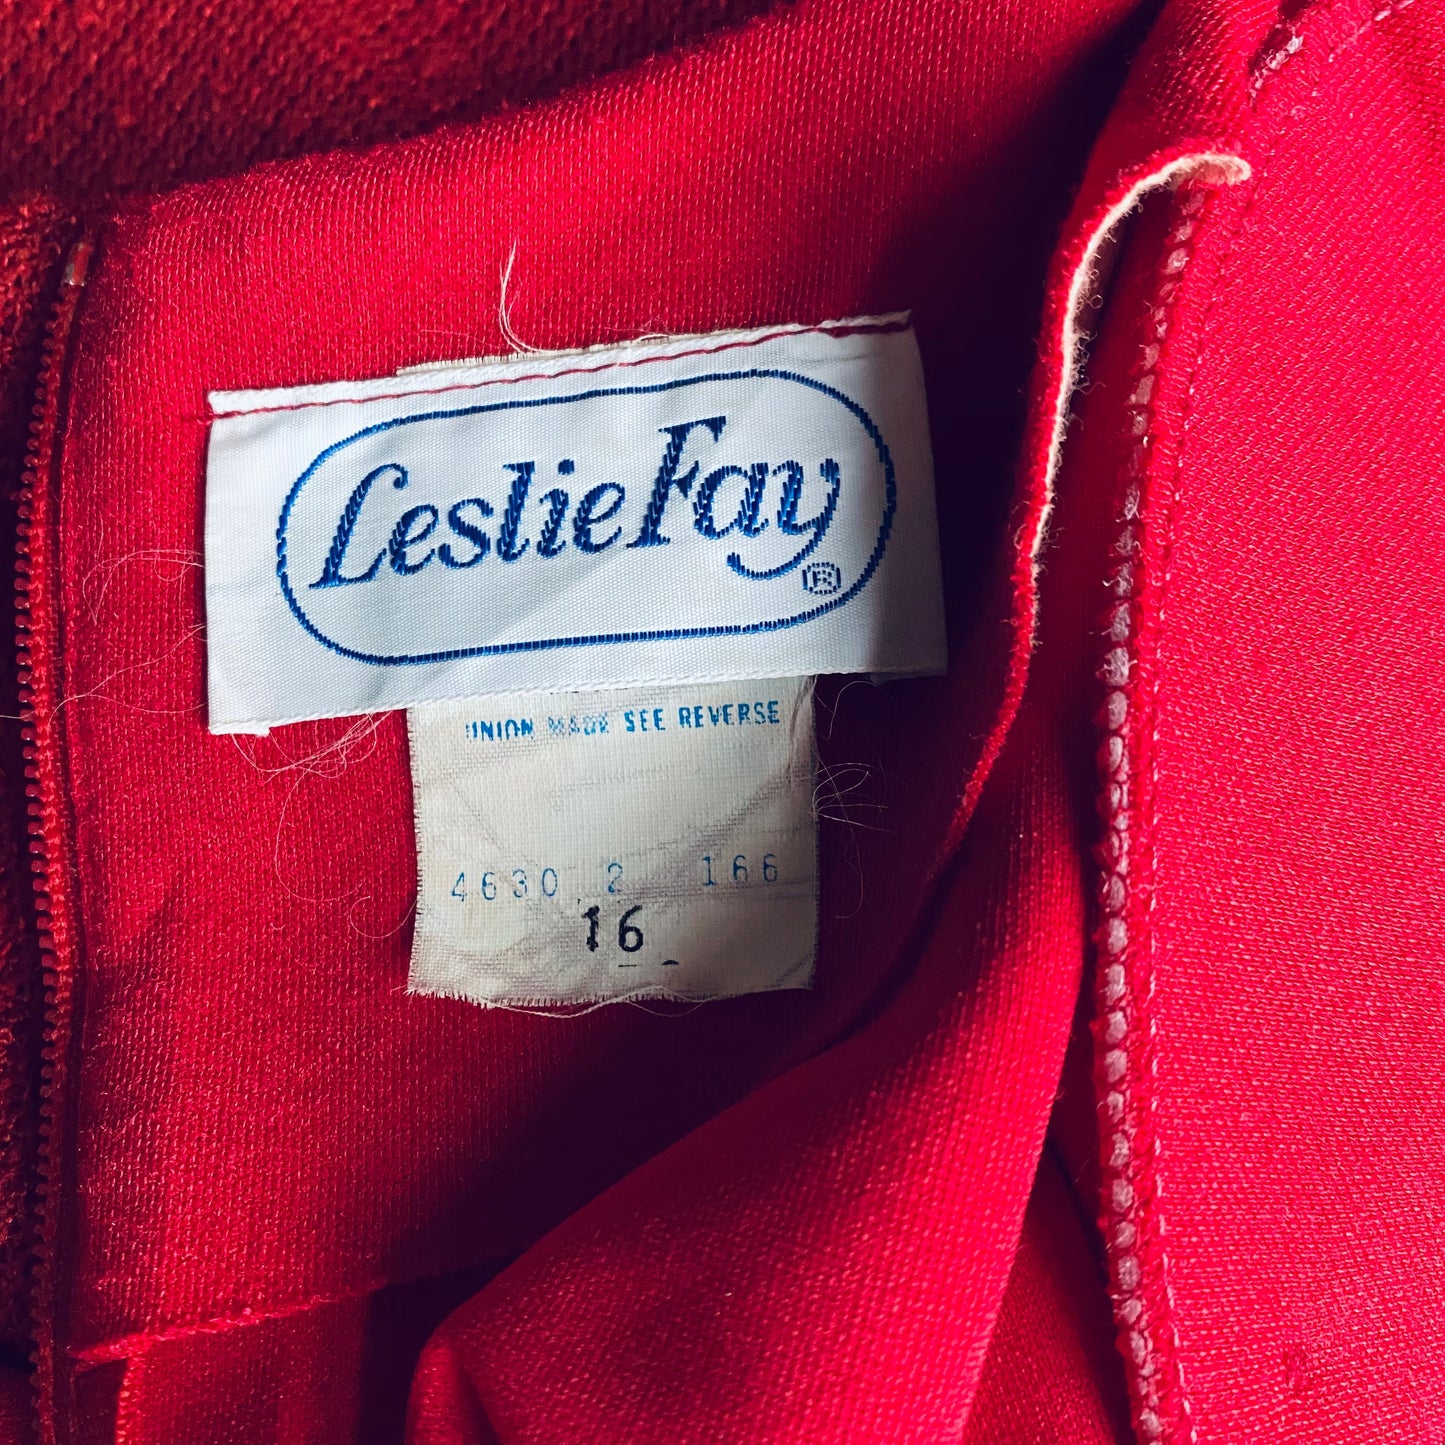 80s red jersey midi dress by Leslie Fay. Approx UK size 14-16